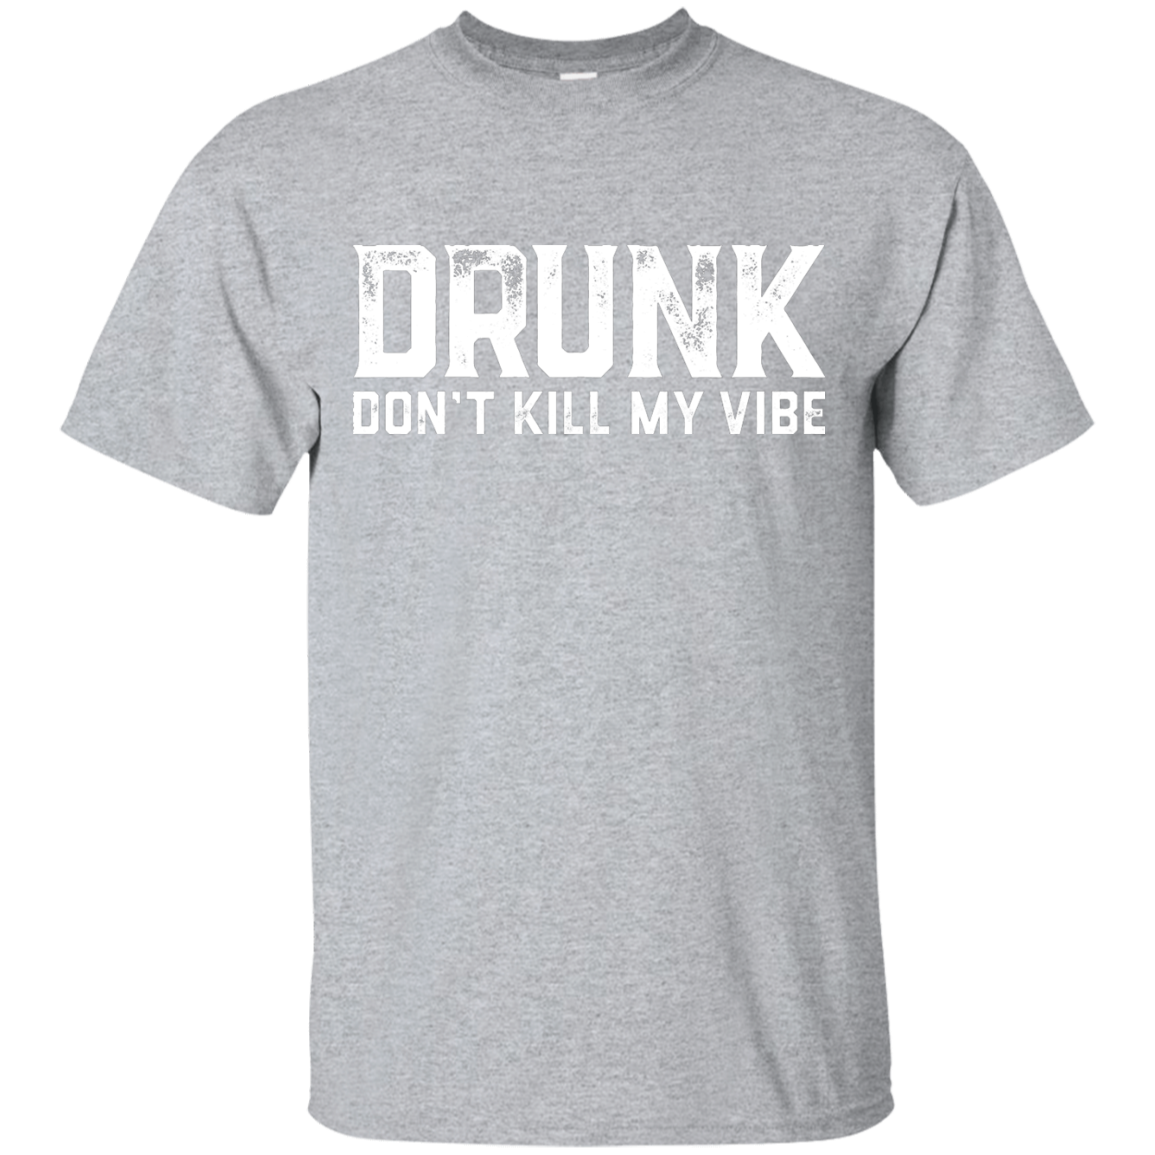 DRUNK Don't Kill My Vibe T-Shirt Apparel - The Beer Lodge